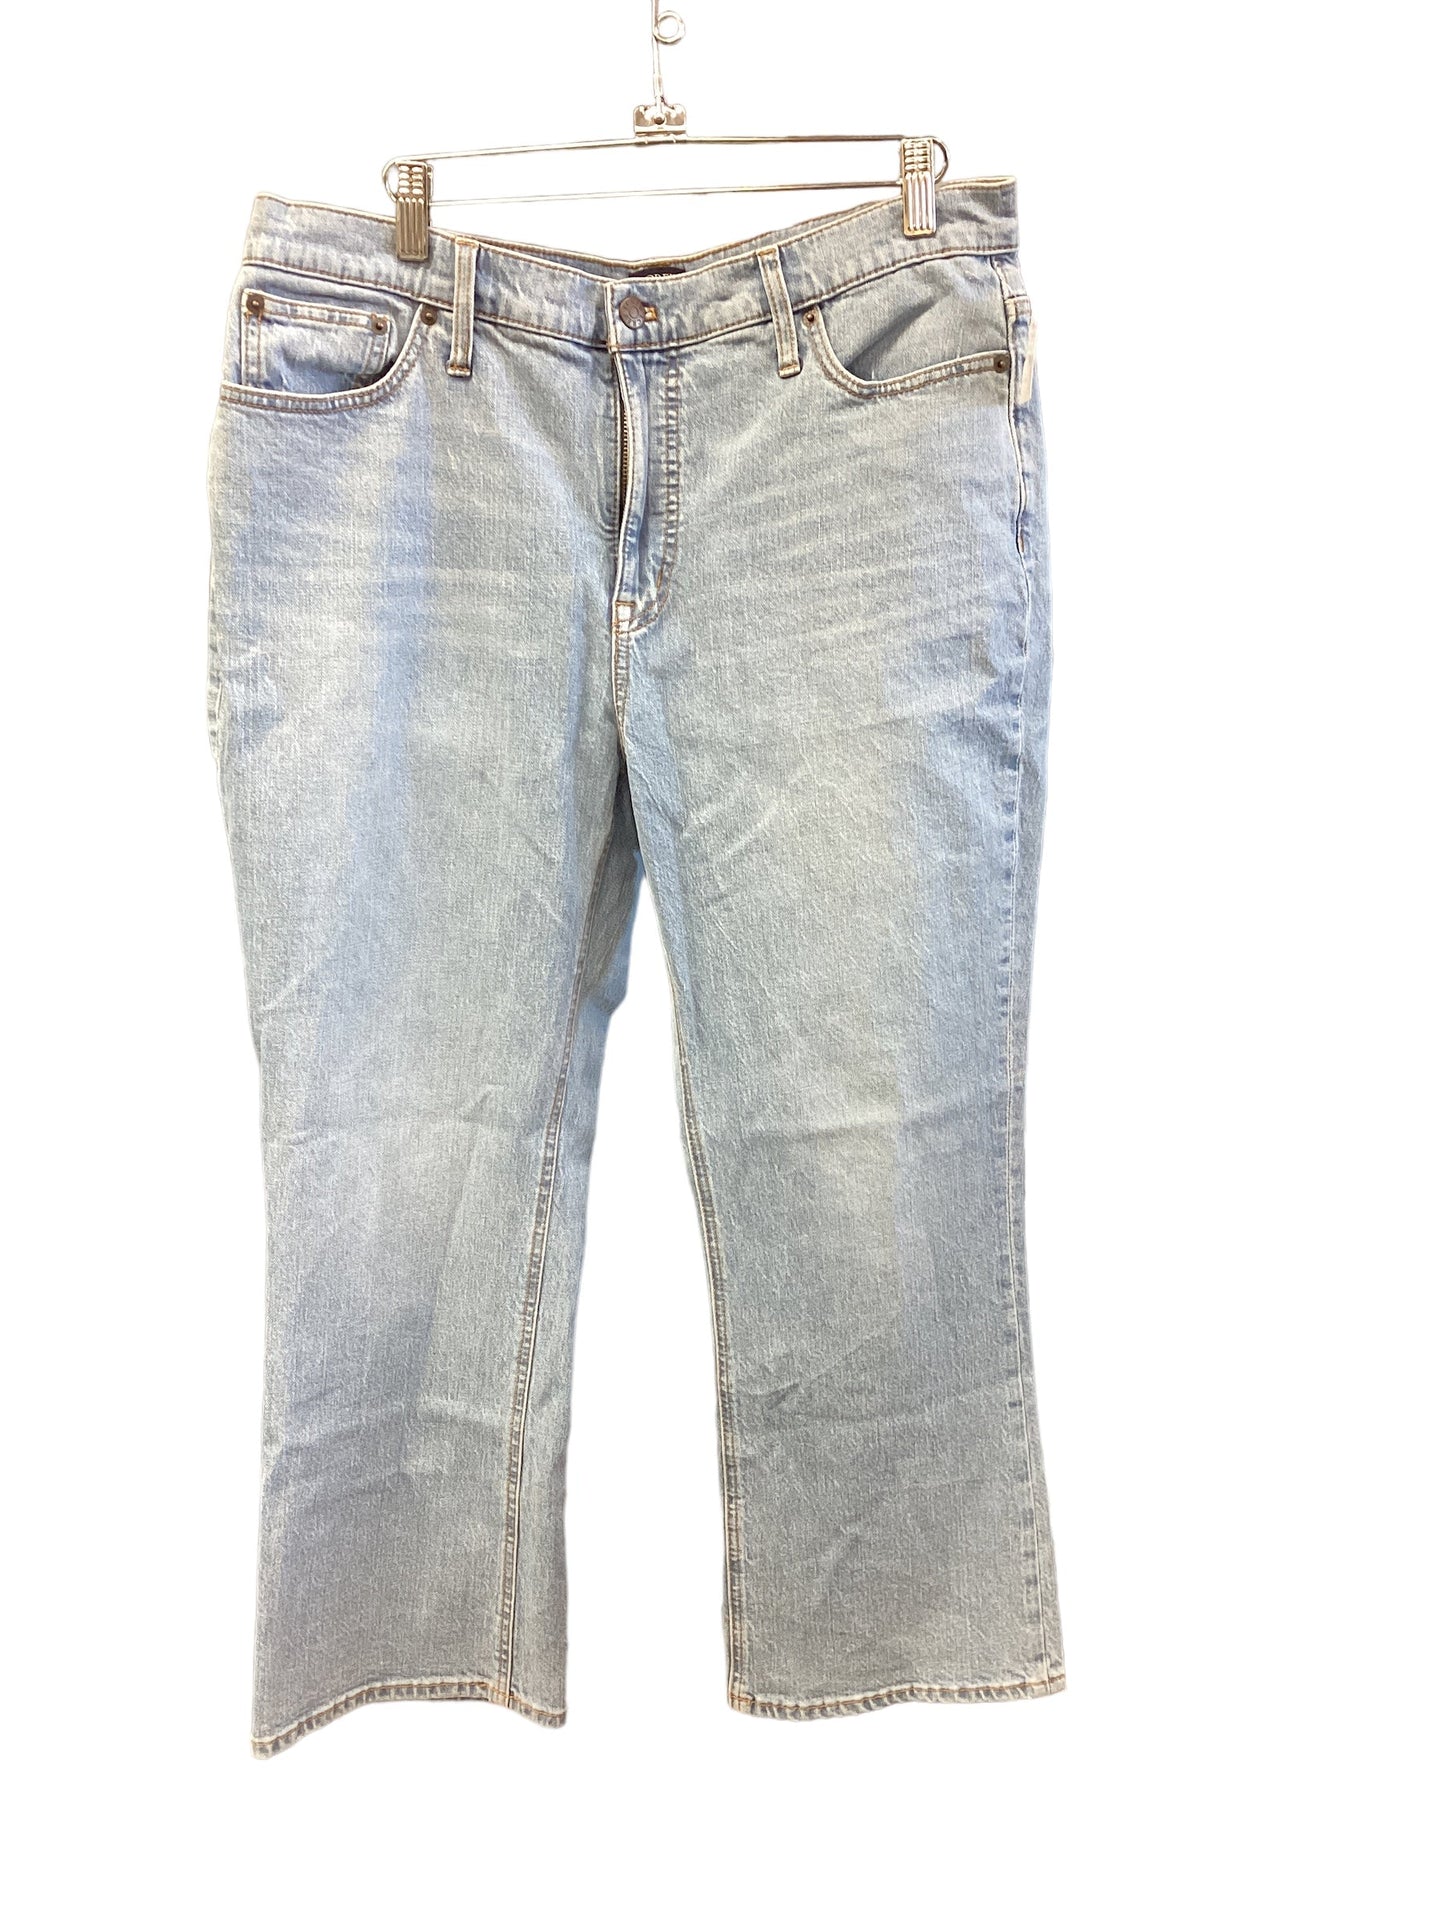 Jeans Flared By J Crew  Size: 14